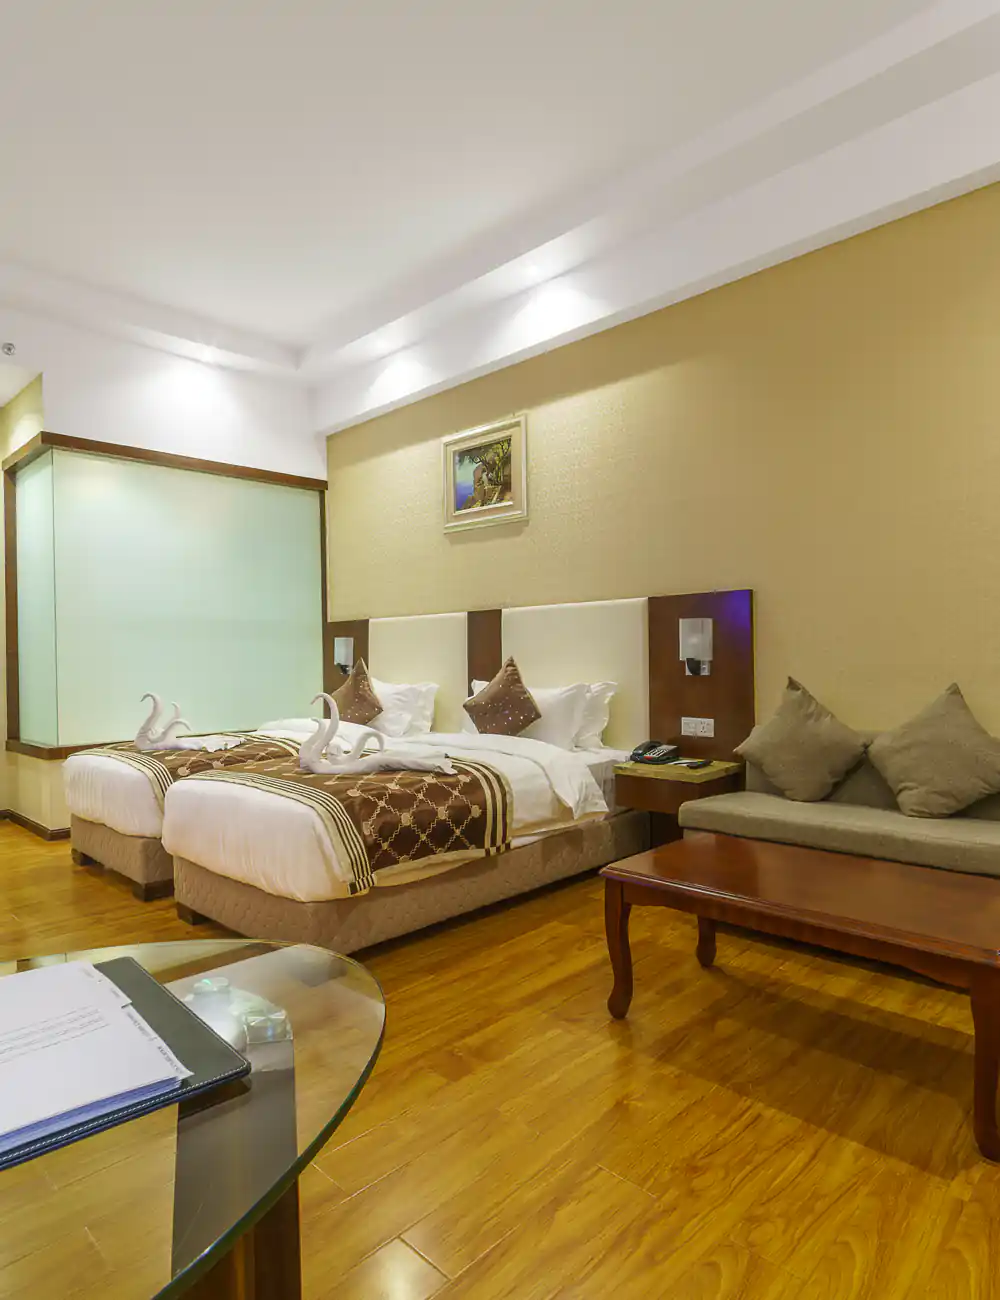 Best Place to stay in Jaipur India